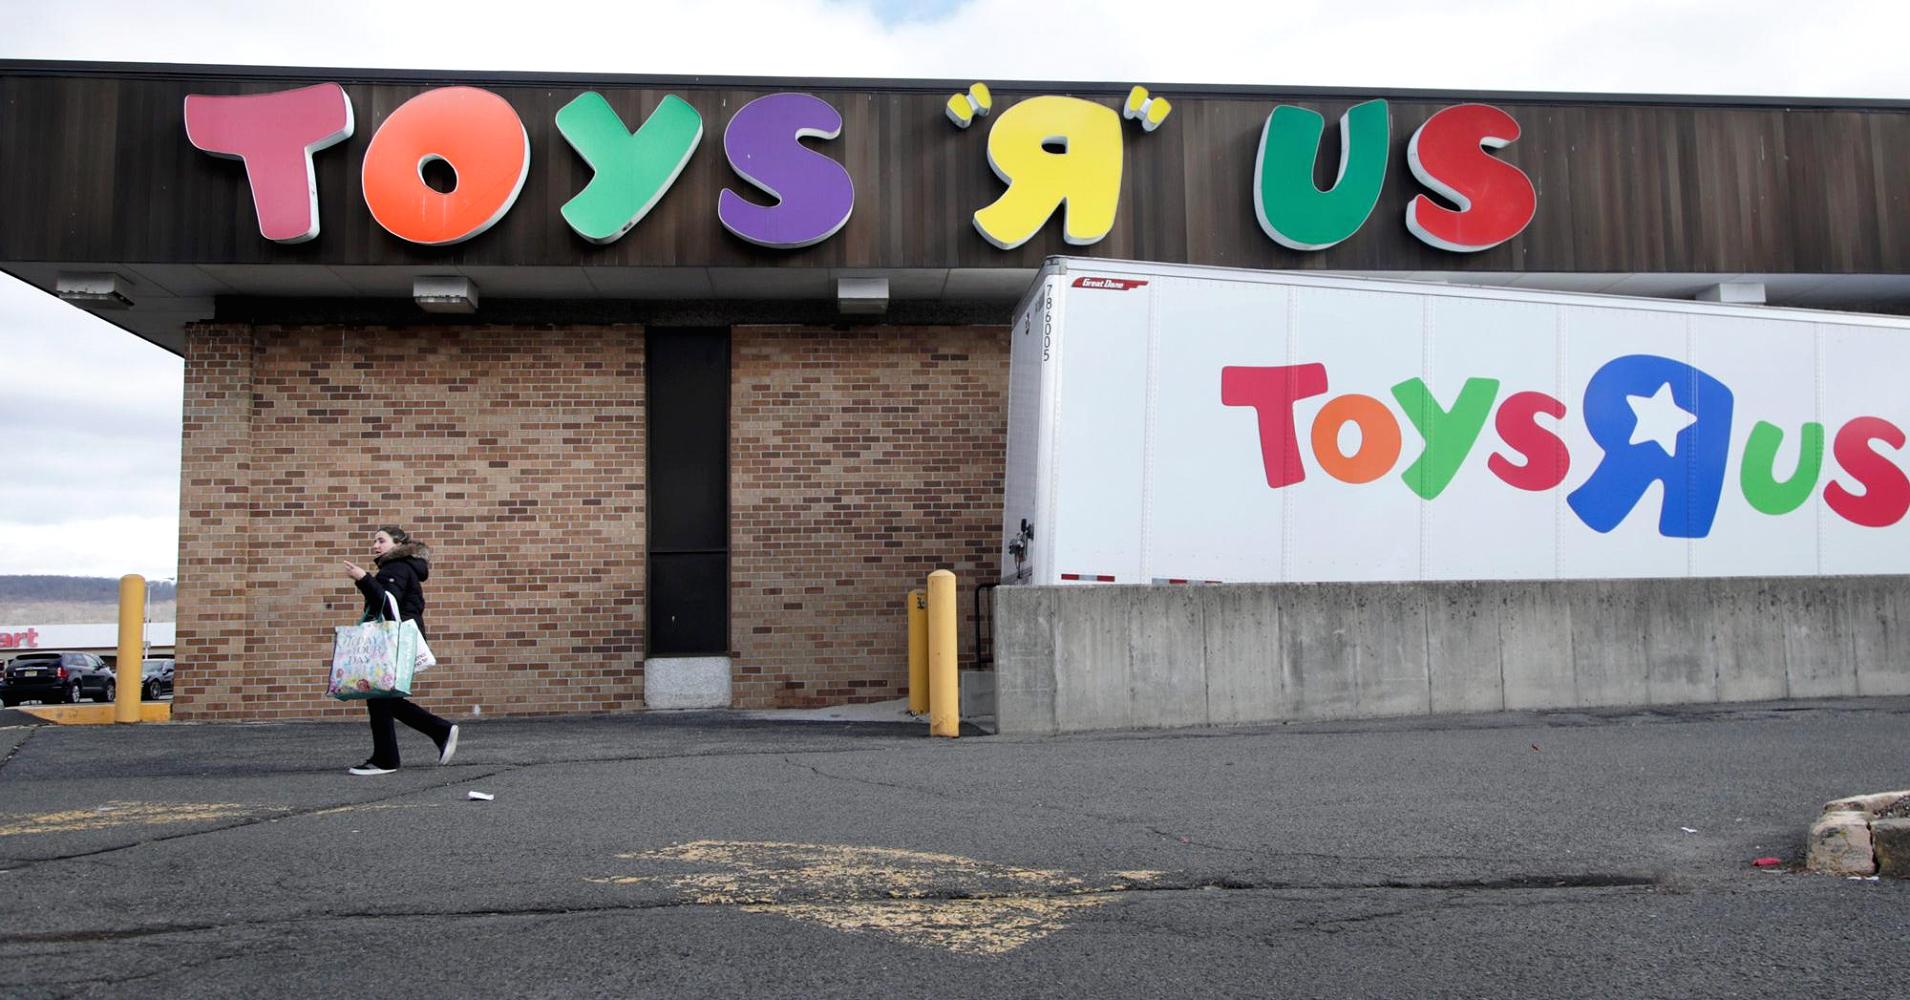 Toys R Us closures will leave hundreds of vacant stores on the market with few obvious replacements